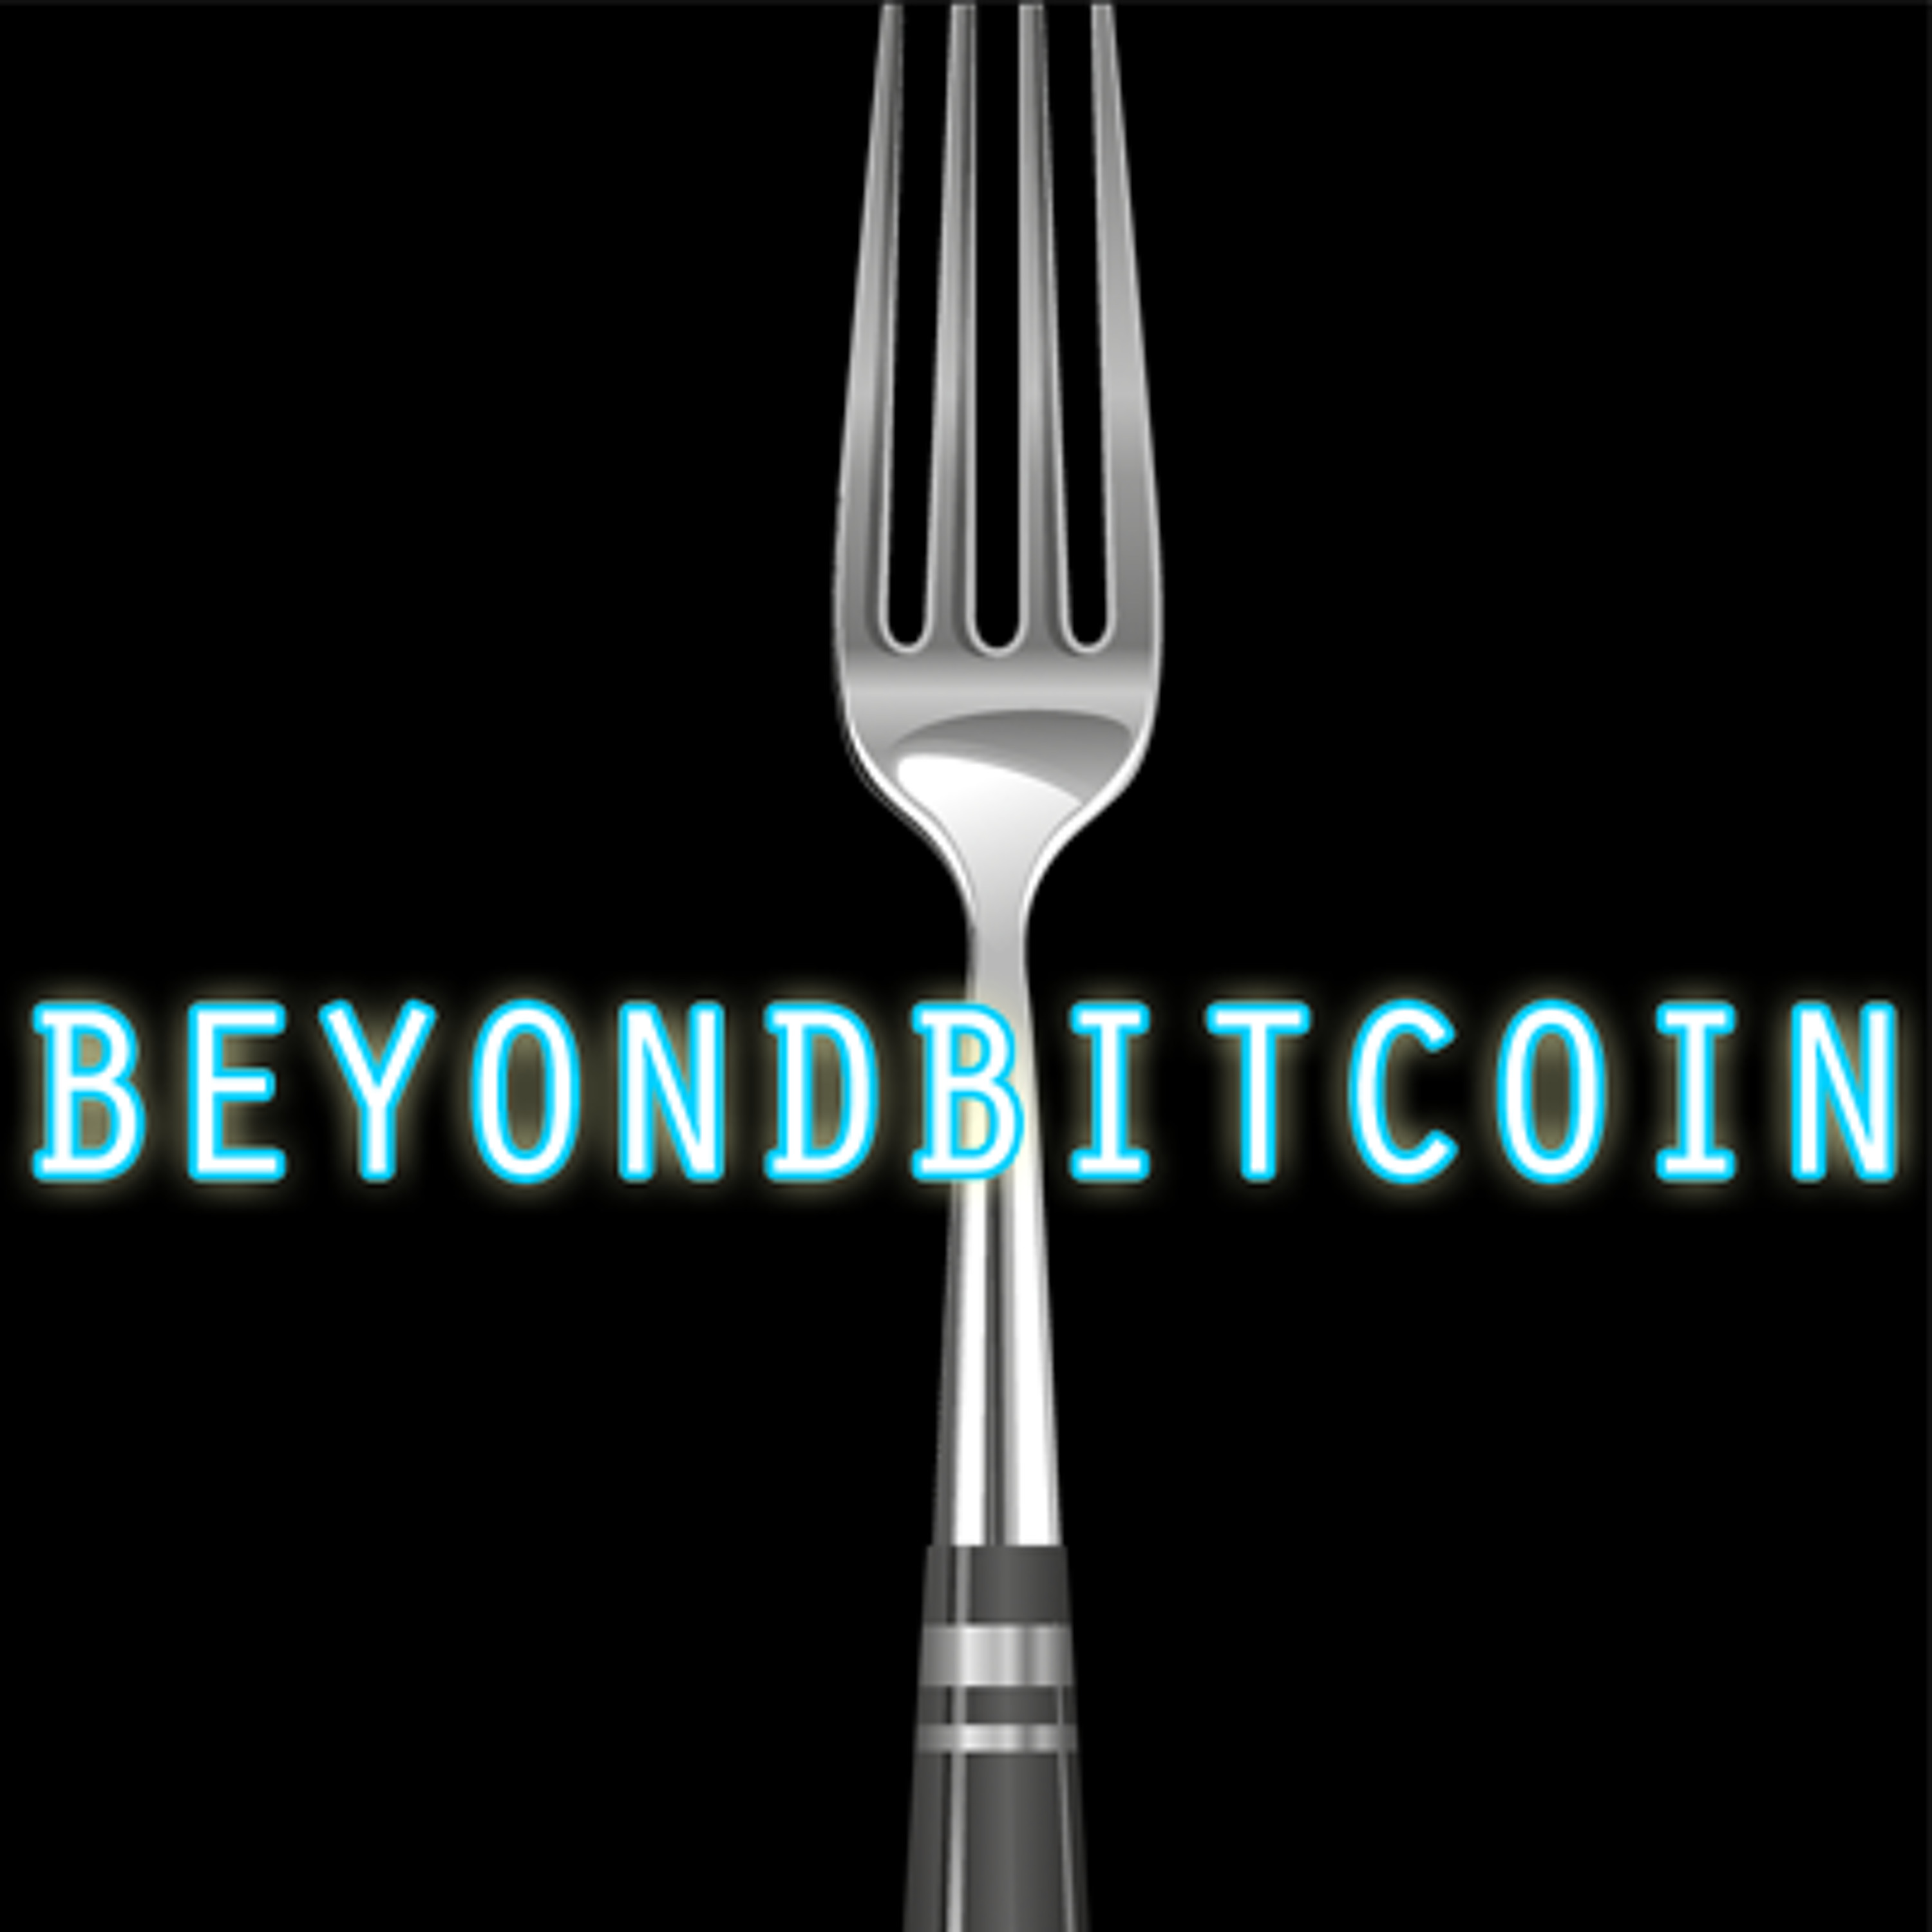 Beyond Bitcoin - 6 - A New Direction For Bitcoin?